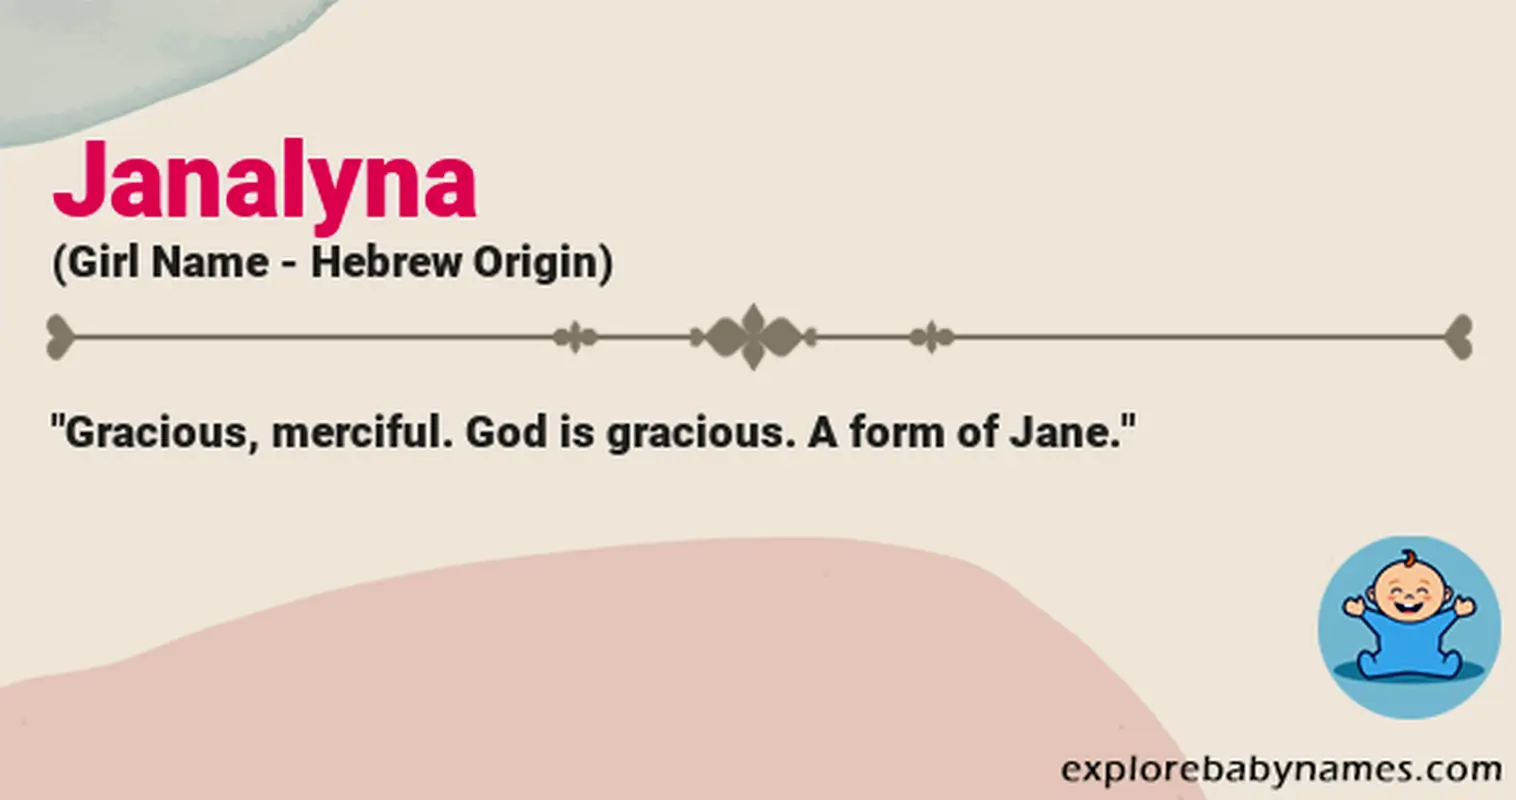 Meaning of Janalyna